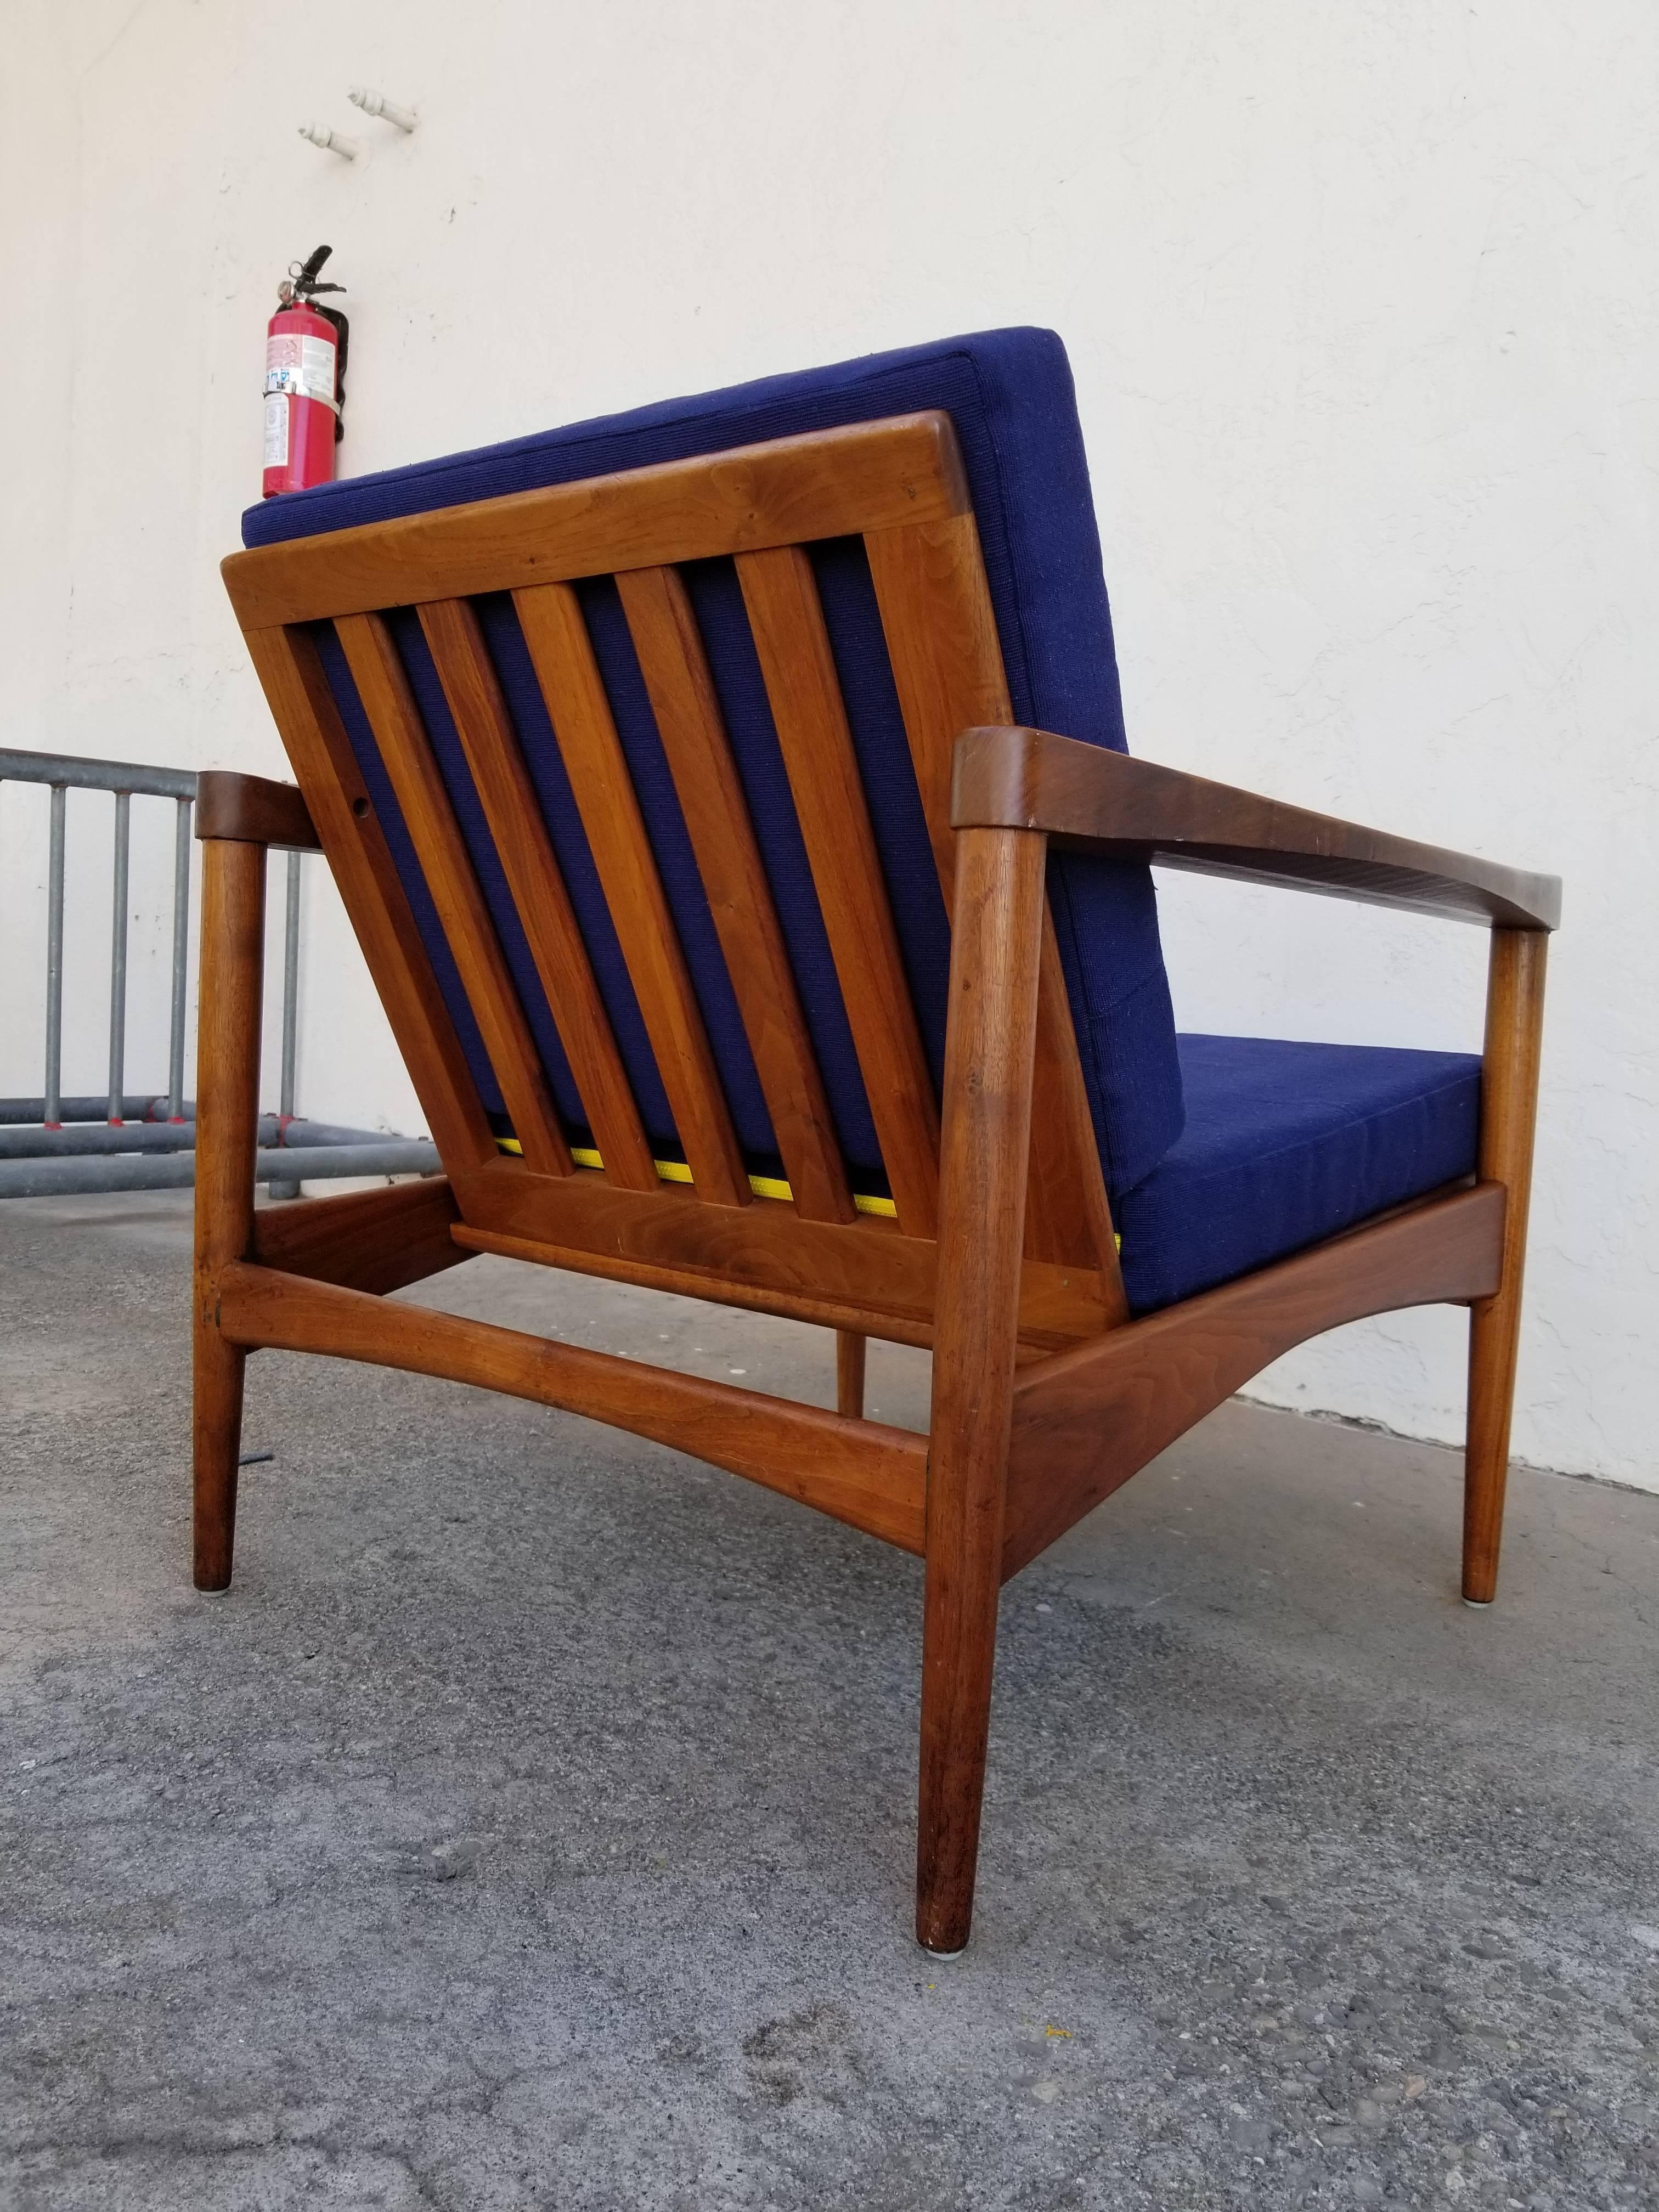 A 1960s Danish modern lounge chair with unique spline detail and beautiful, sculptural design. Crafted in solid walnut.